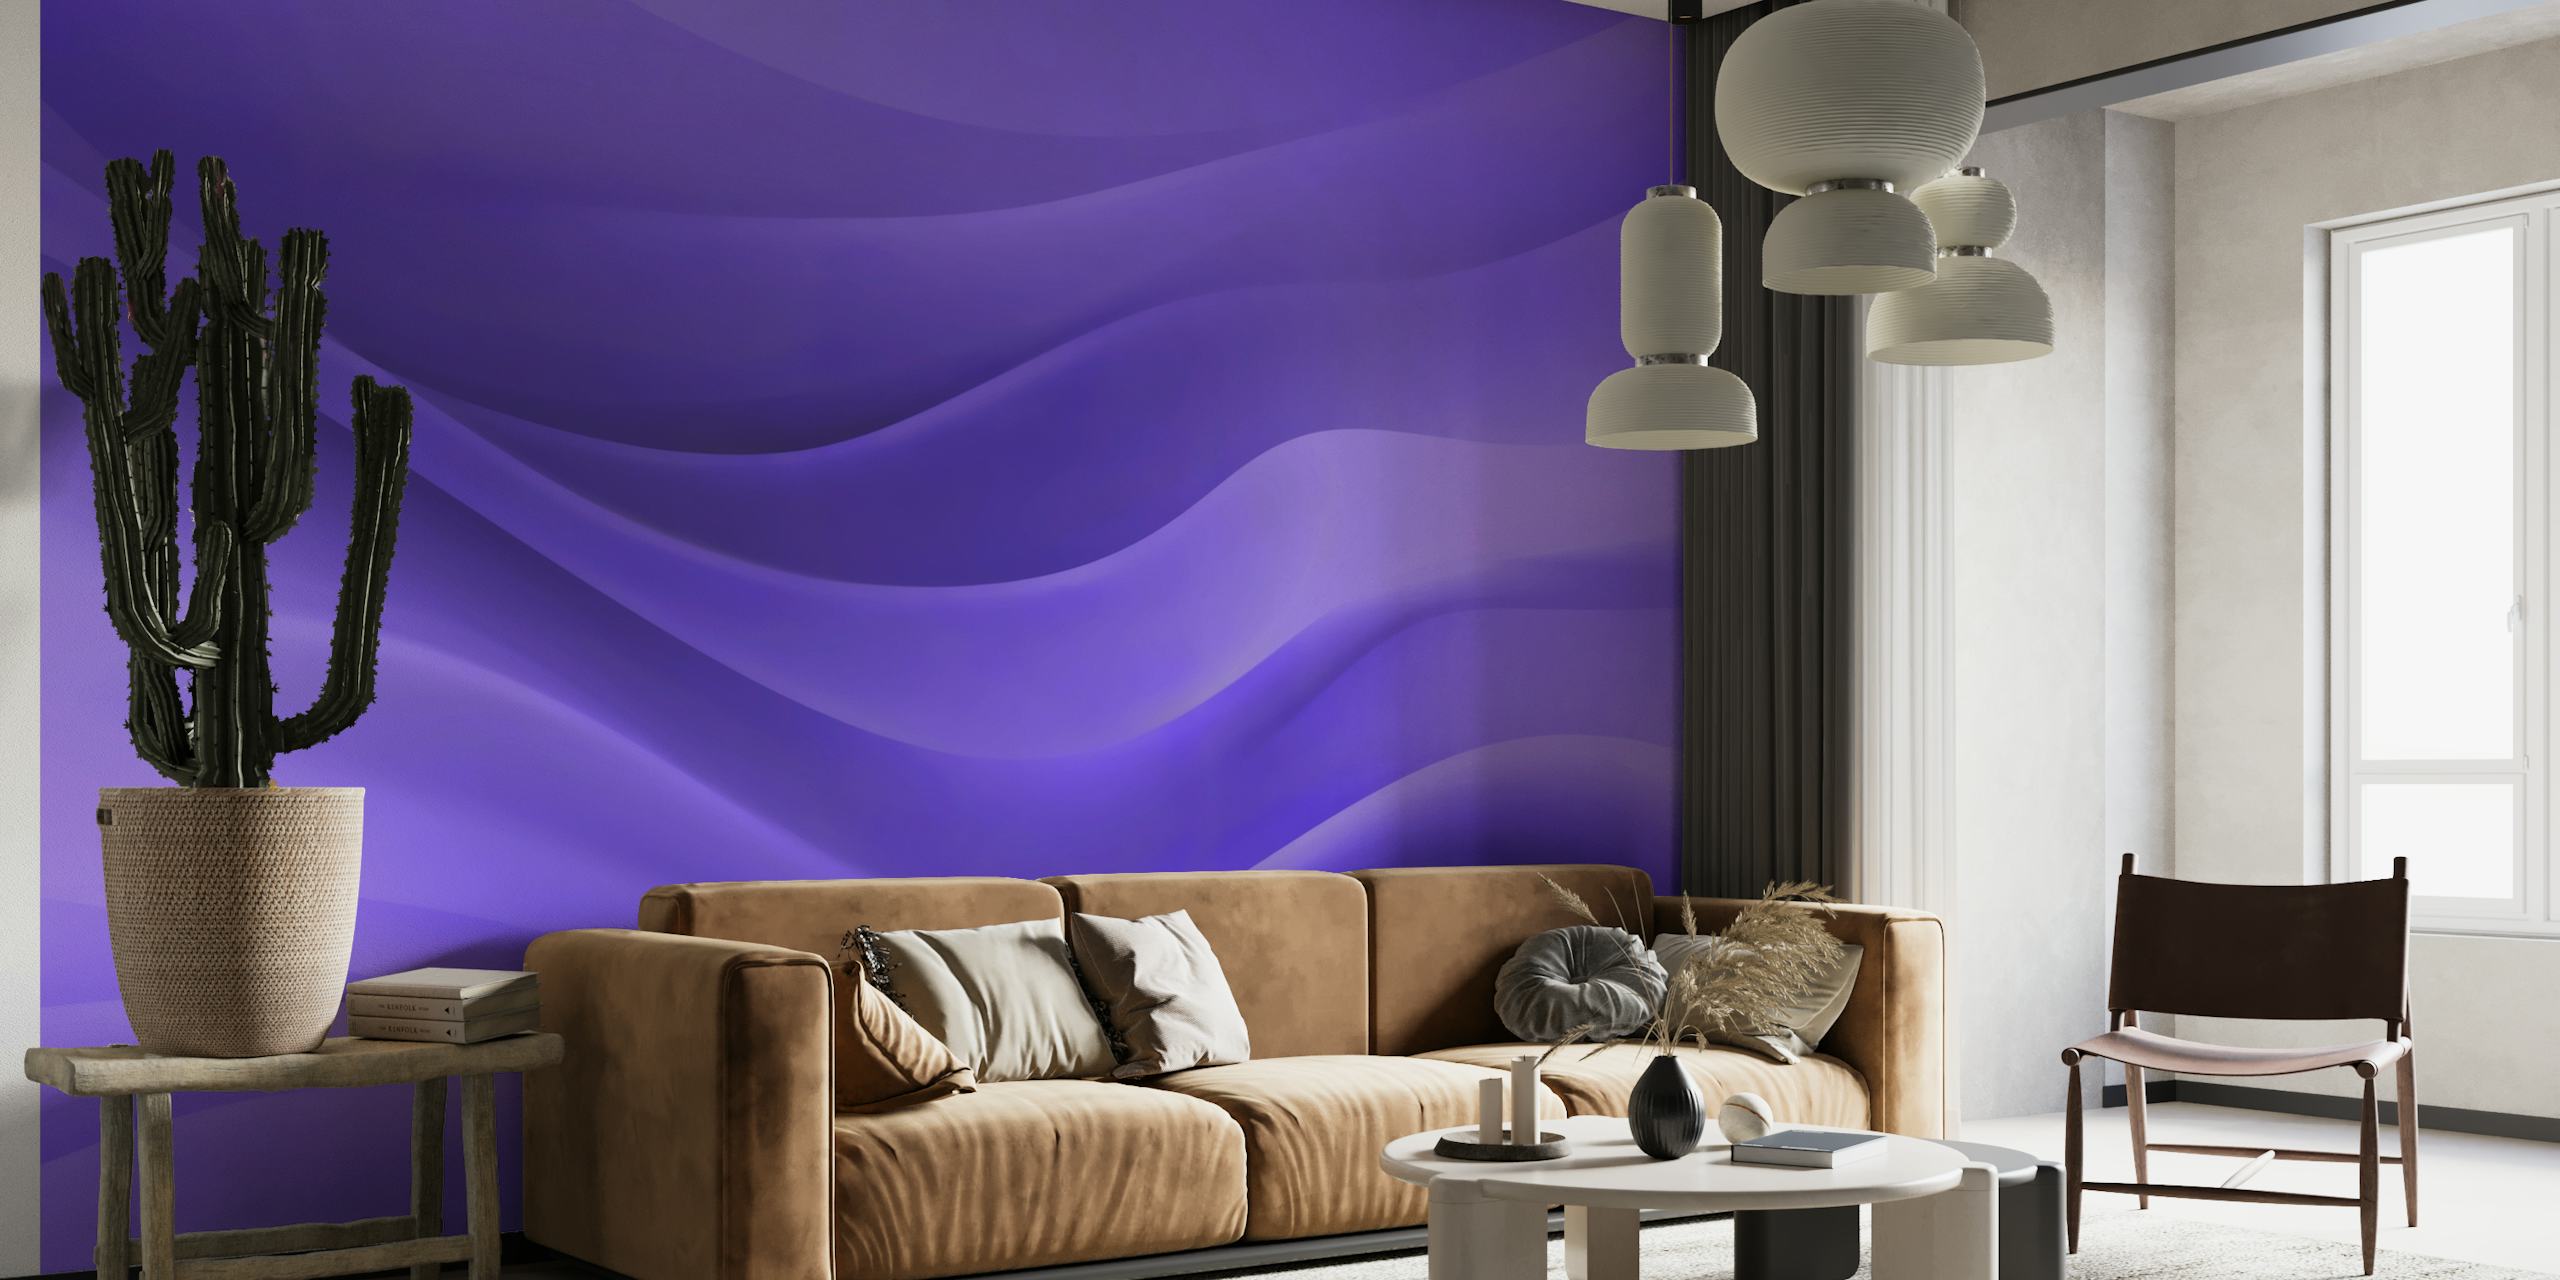 Soothing Calm Smooth Waves Rich Purple papel pintado